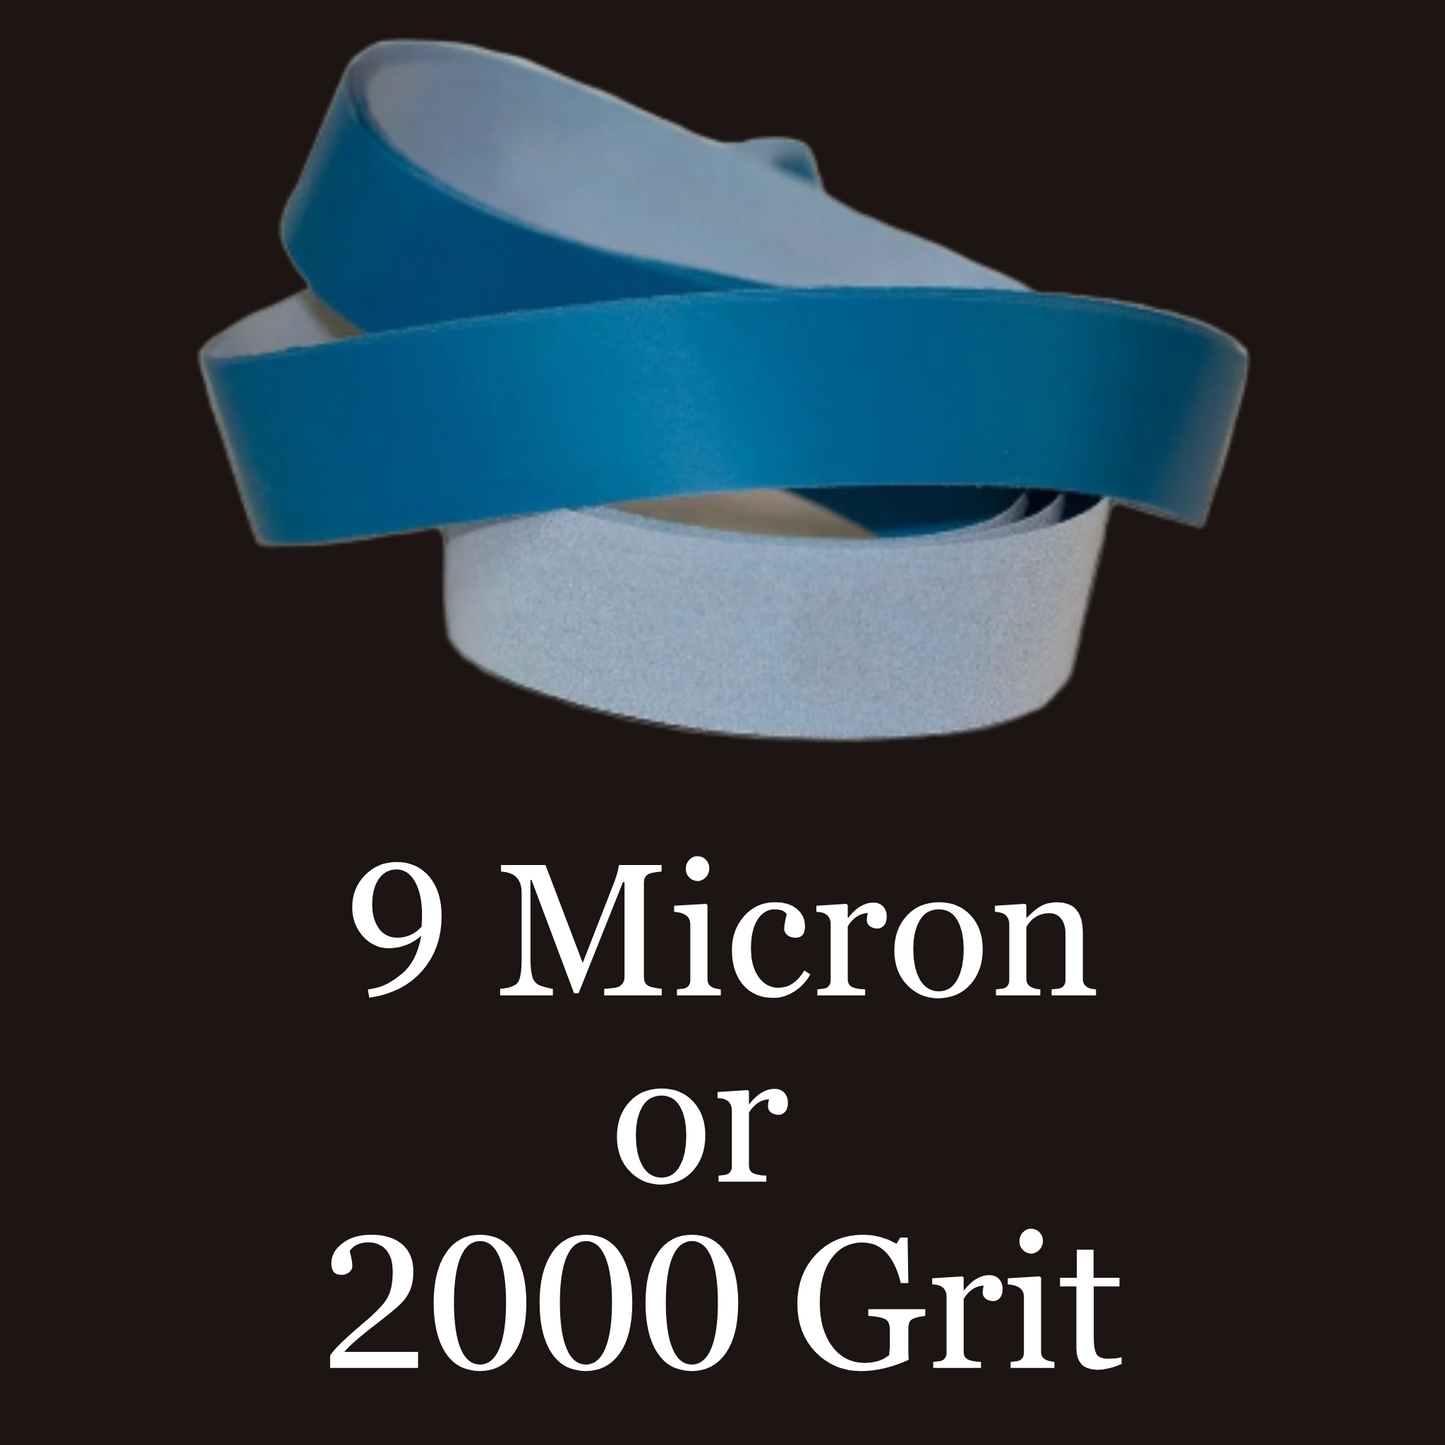 1” x 72” Film Micron Graded Finishing Belts 9 Micron or 2000 Grit